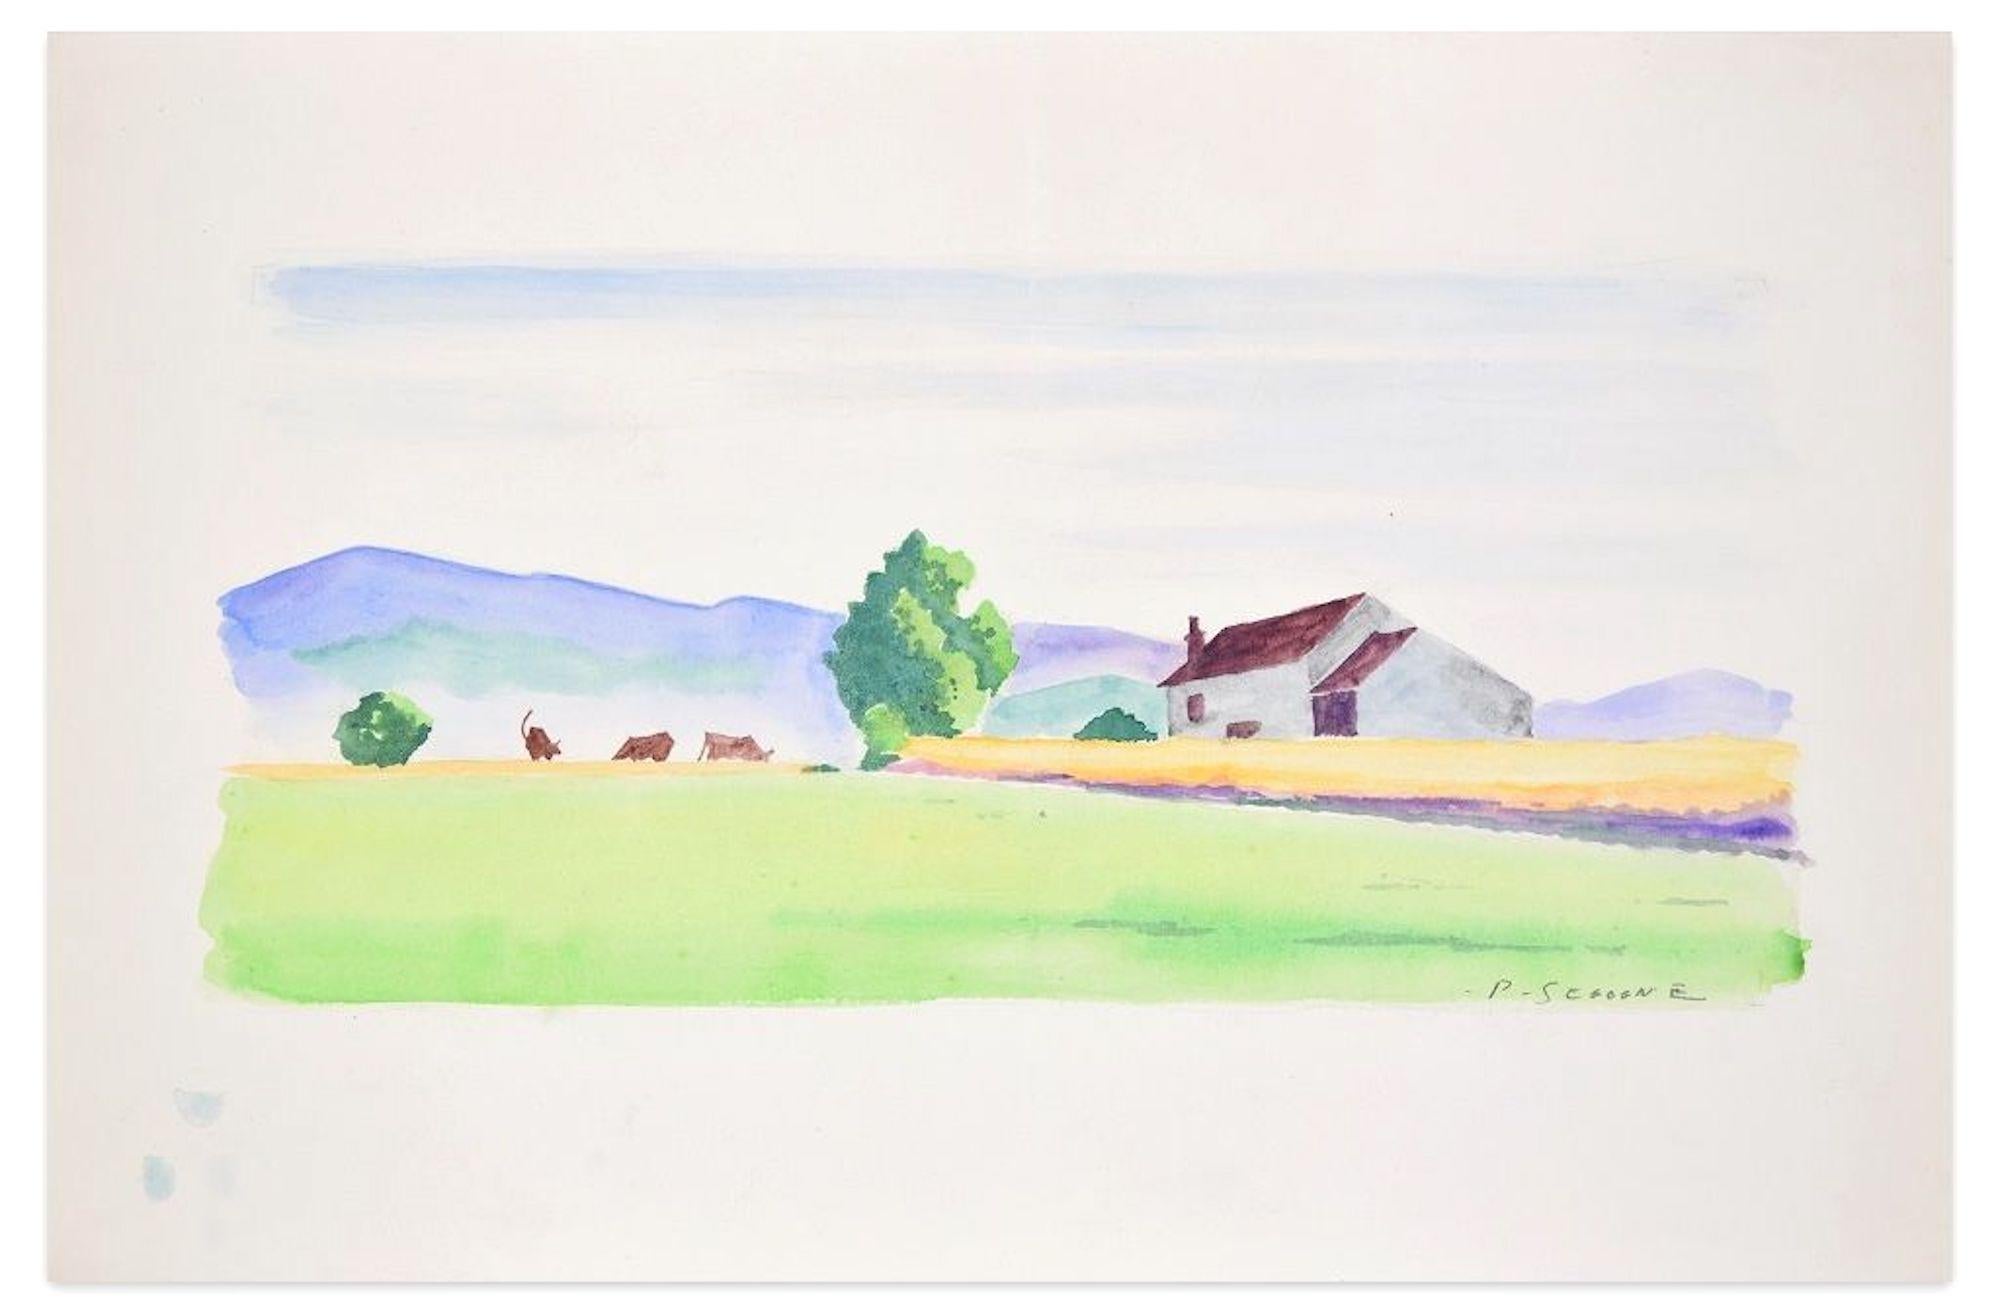 Countryside - Original Watercolor on Paper by Pierre Segogne - 1950s